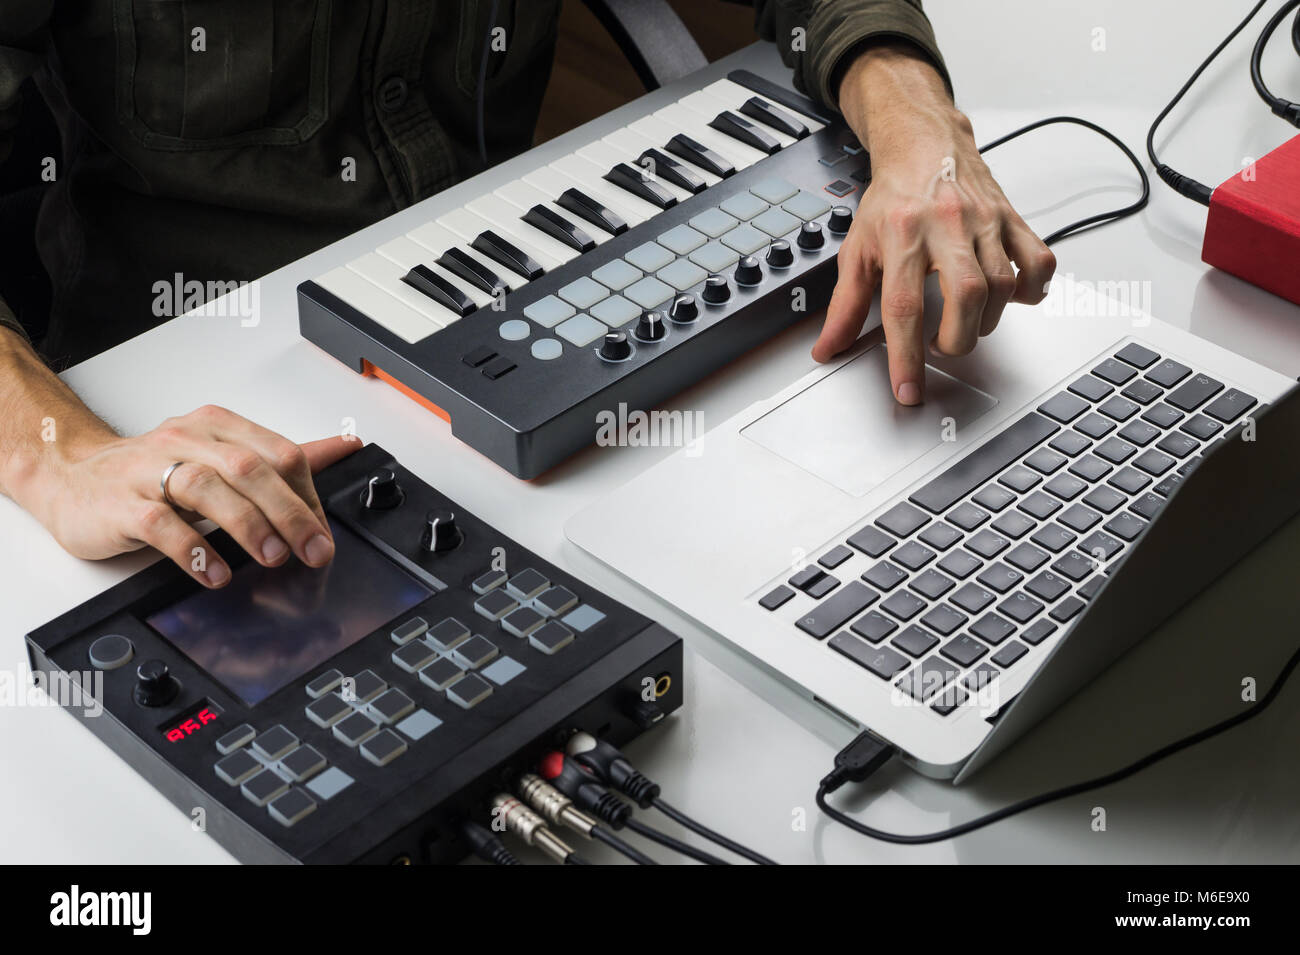 Producing electronic music on laptop with portable midi keyboard and electronic effect processors Stock Photo